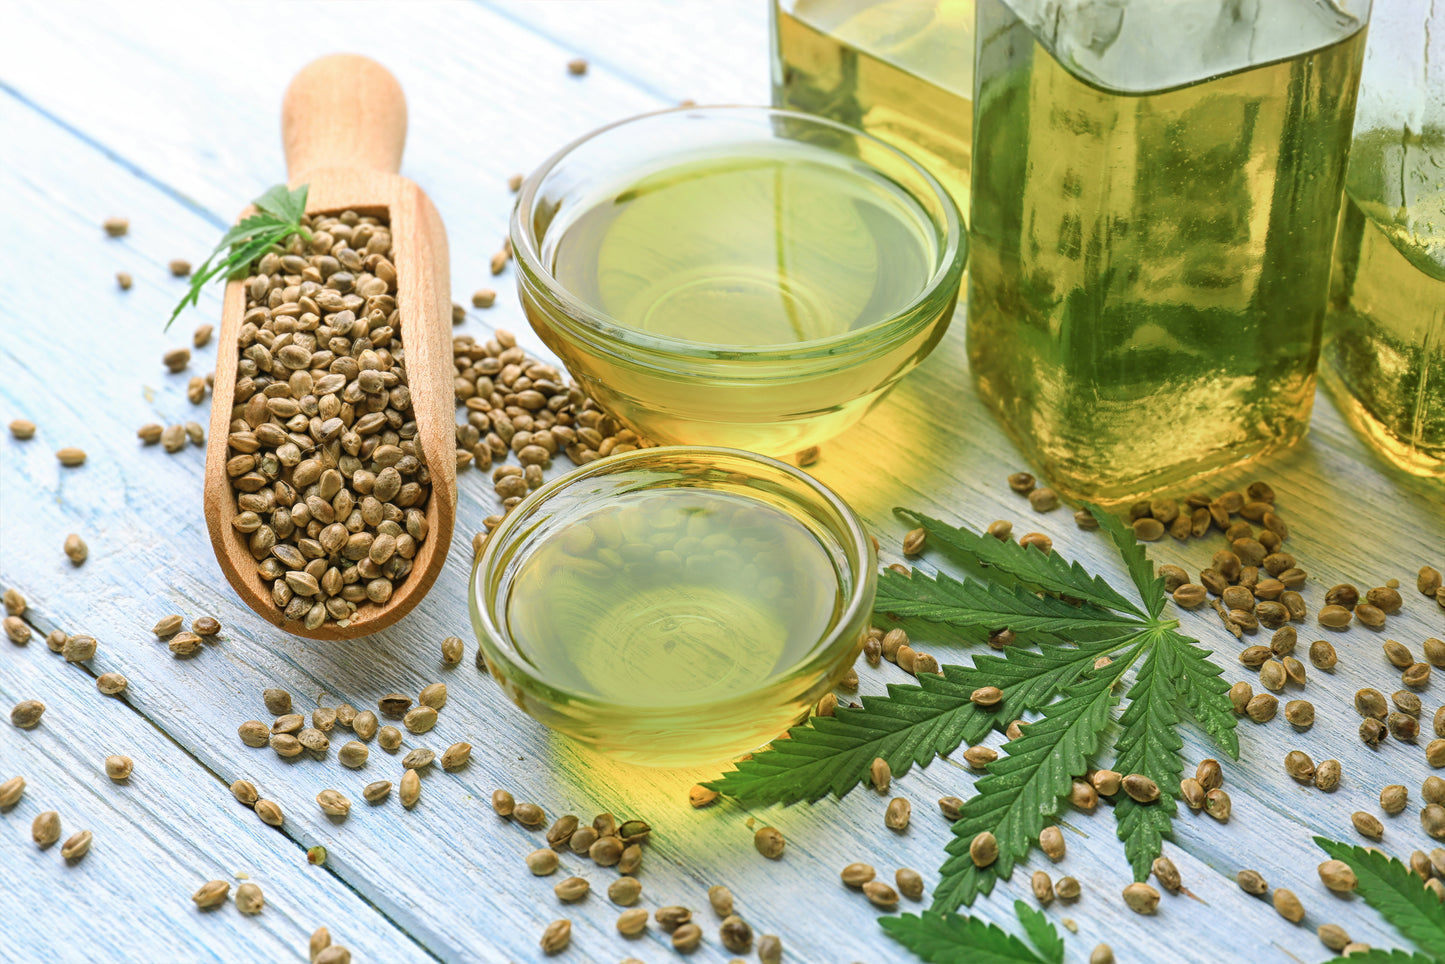 How hemp seed oil is beneficial for skin and hair